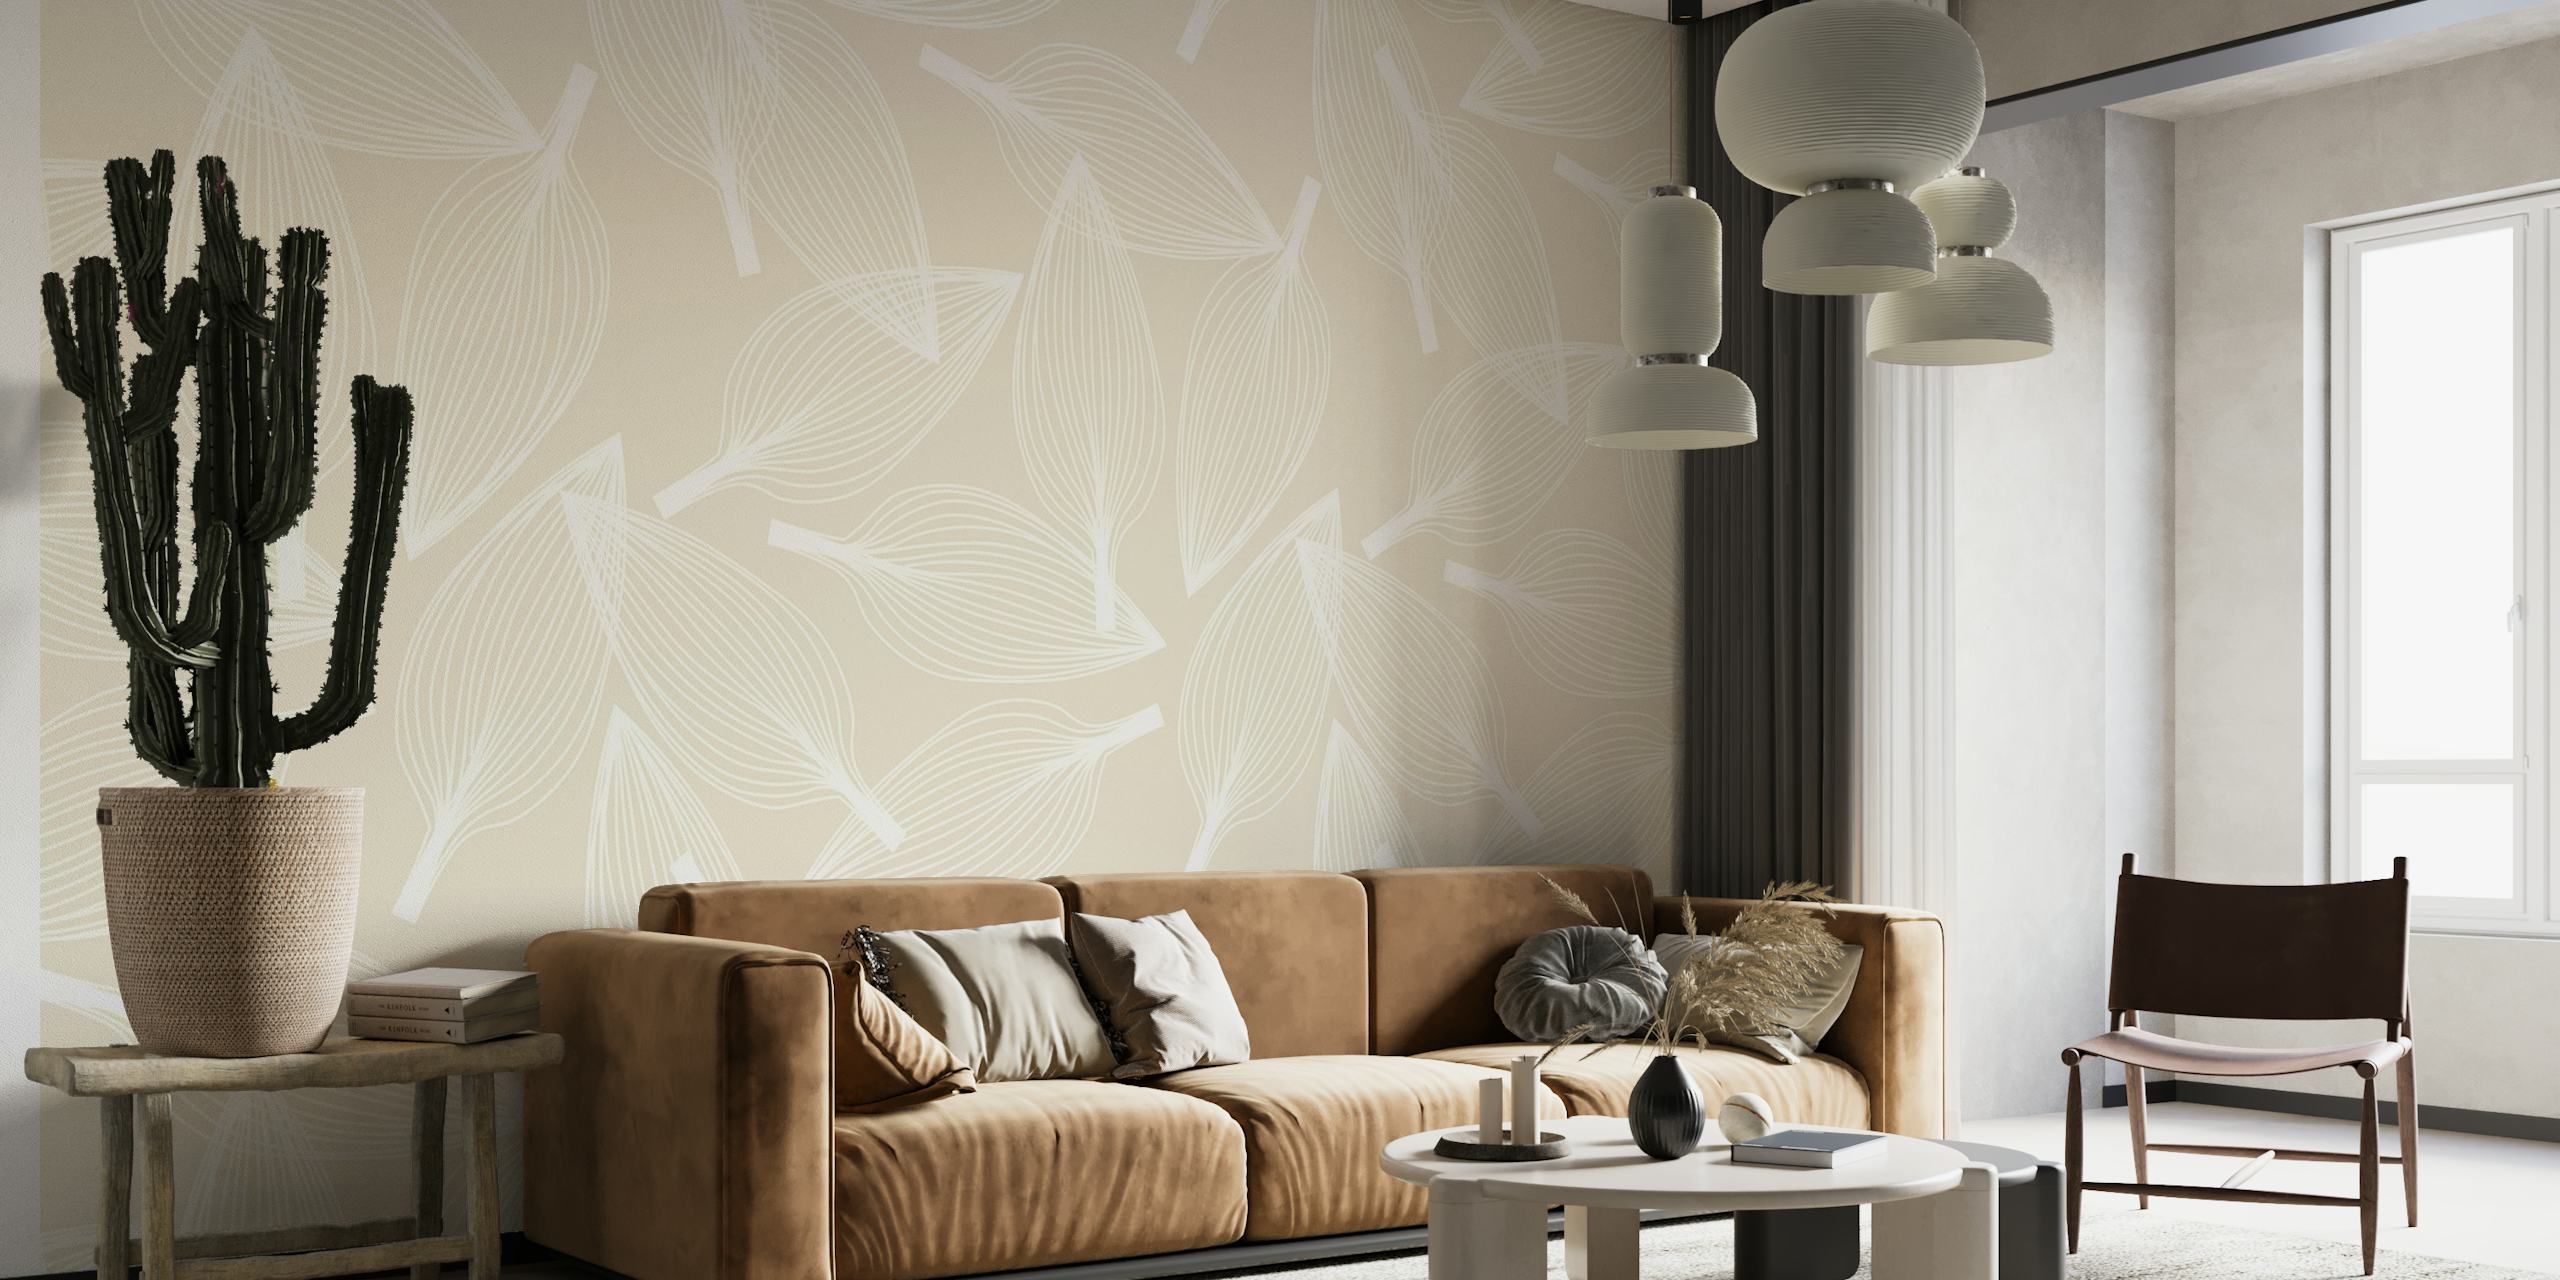 Neutral-toned wall mural with soothing organic pattern design